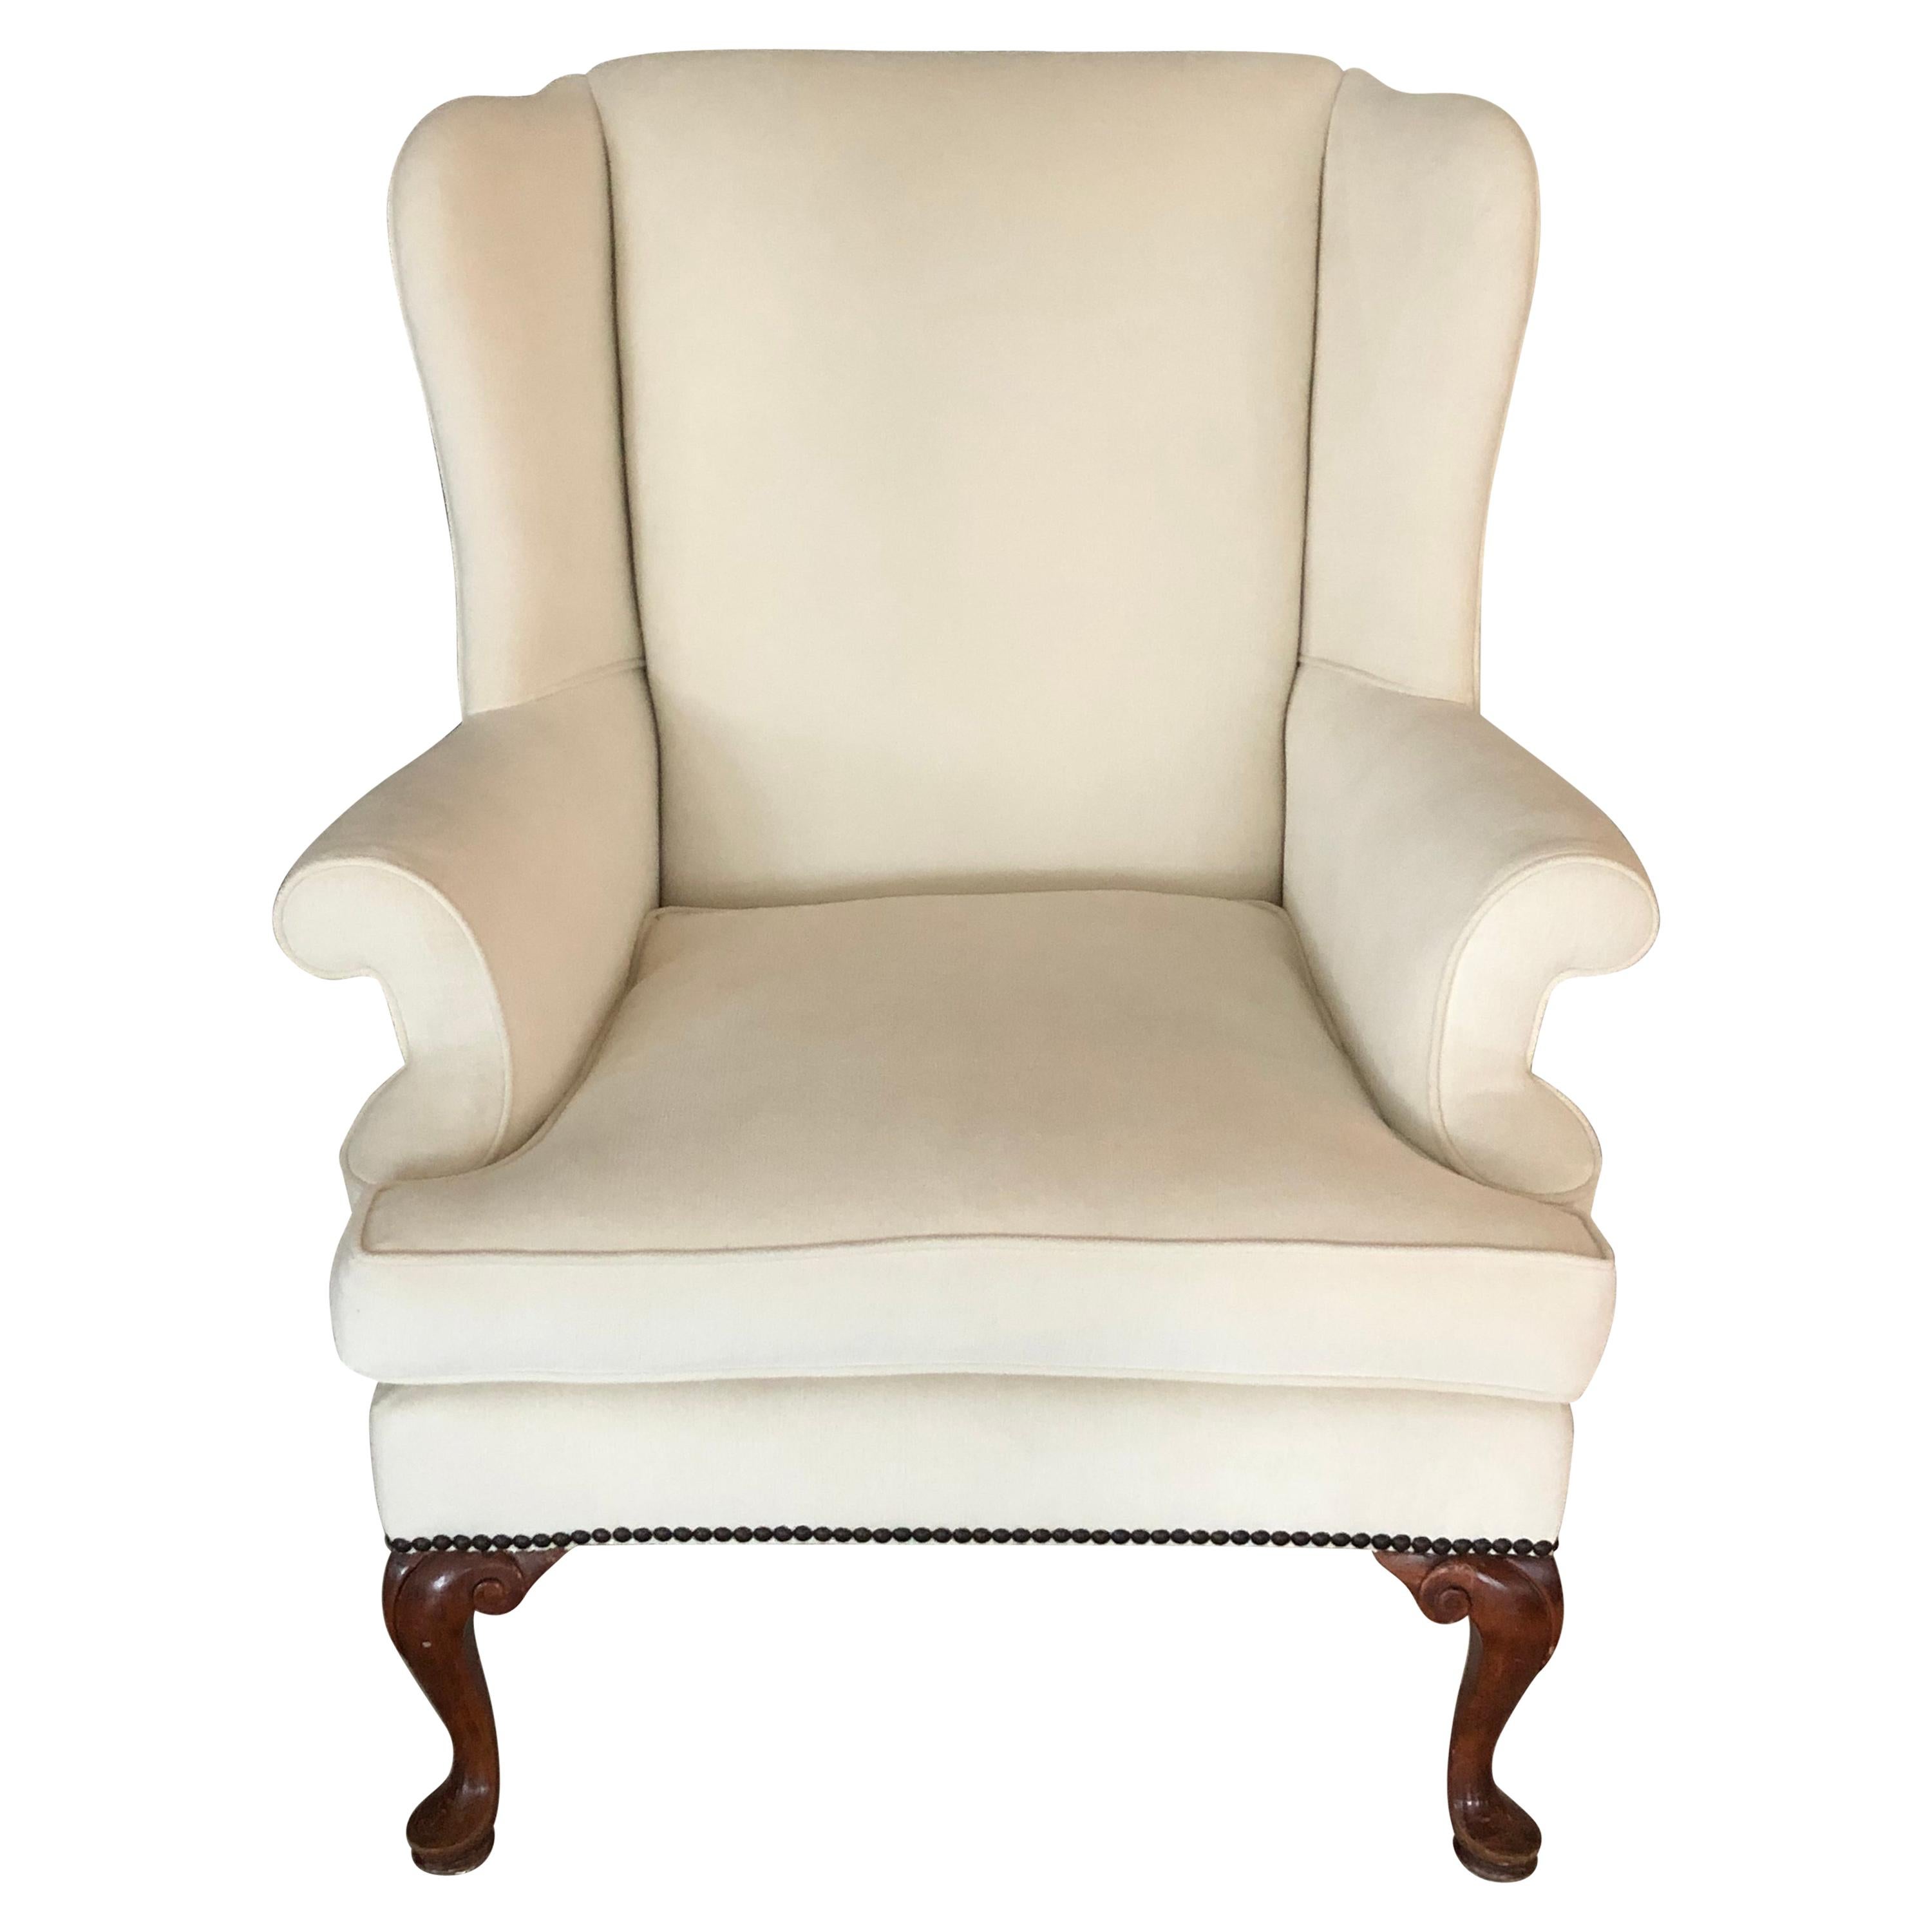 Beautiful Queen Anne wingback chair in off-white fabric. Midcentury, England, circa 1950s.